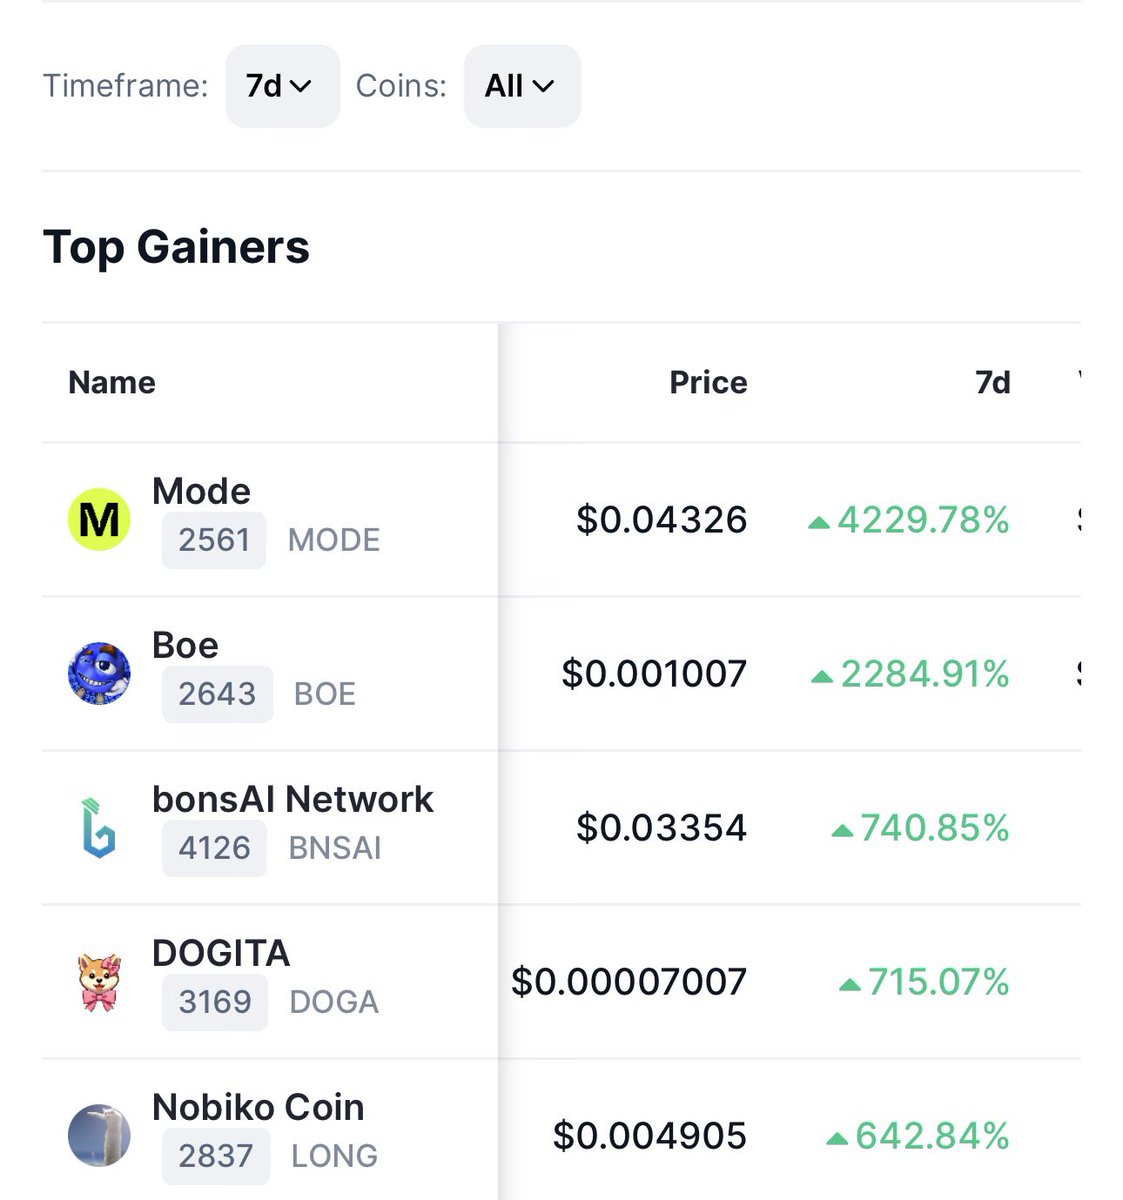 Have you seen the @CoinMarketCap top gainers list this week? @NobikoCoin sitting there top 5, like it will be a top 5 cat meme this cycle. Join the telegram and see what this community is made of anon. Based on longcat OG 4chan 2005/6 meme, 🔥 narrative